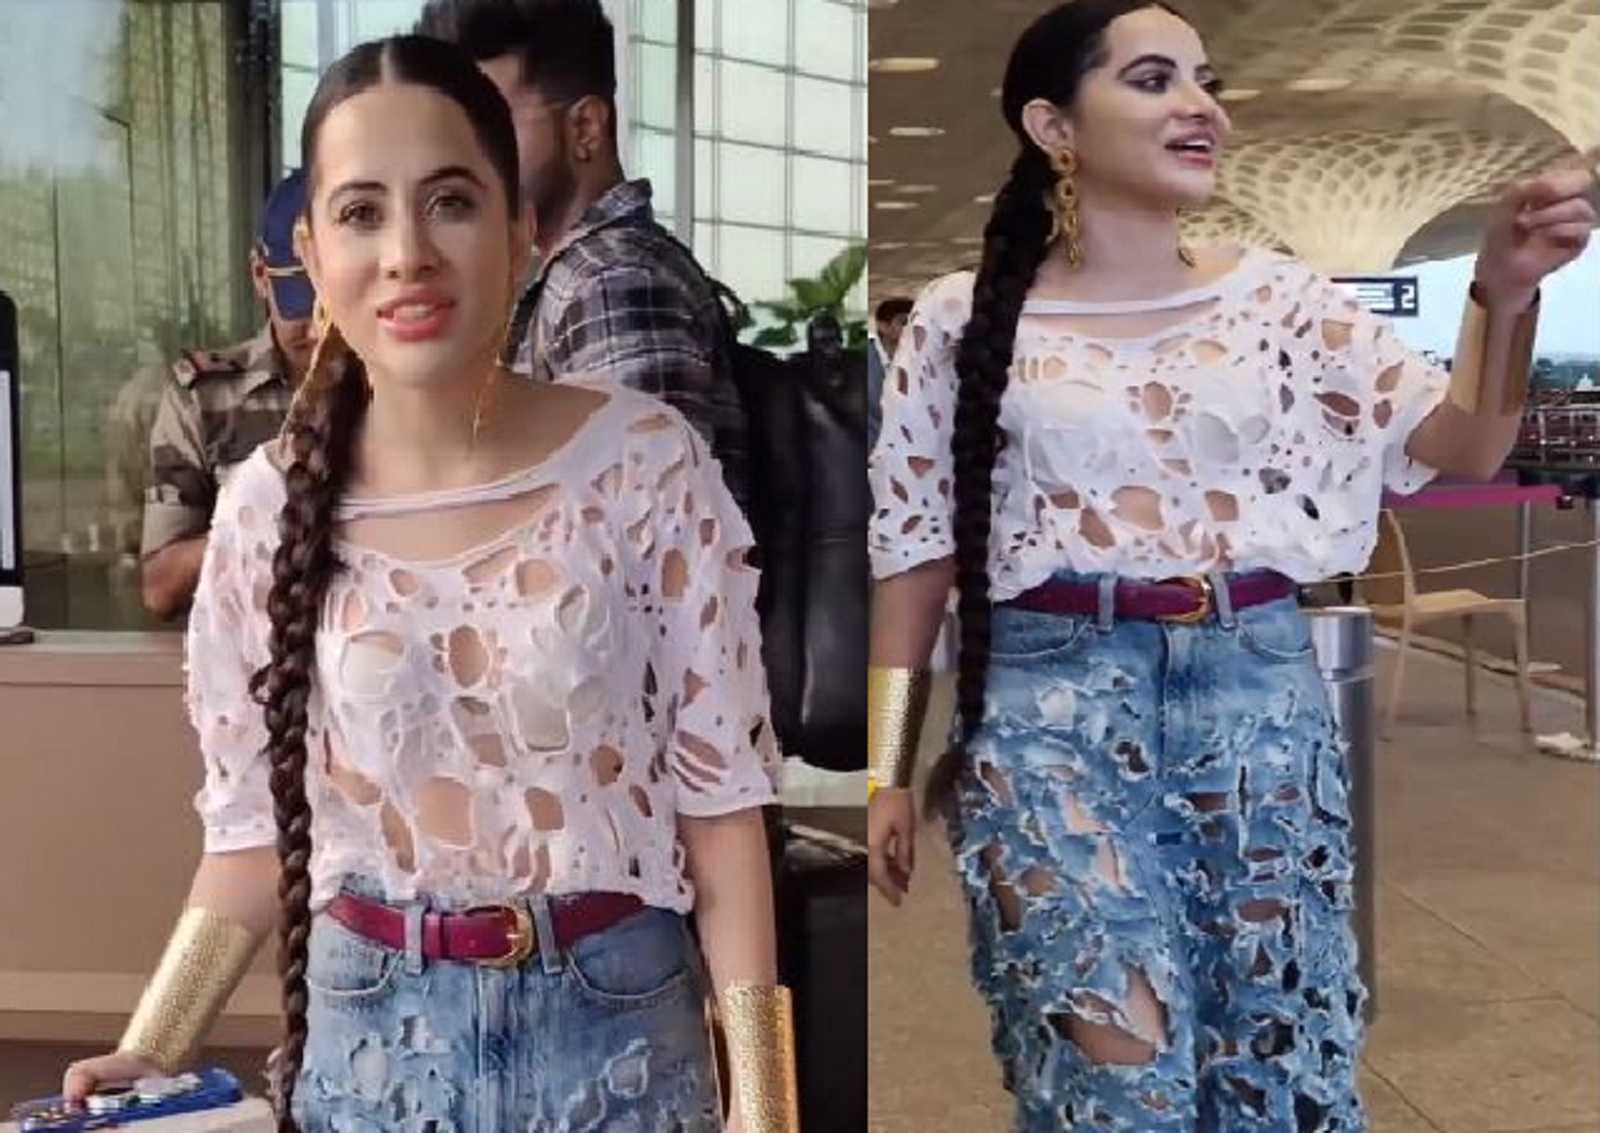 'Rava dosa pro max': Urfi Javed's latest airport look evokes hilarious reactions from netizens